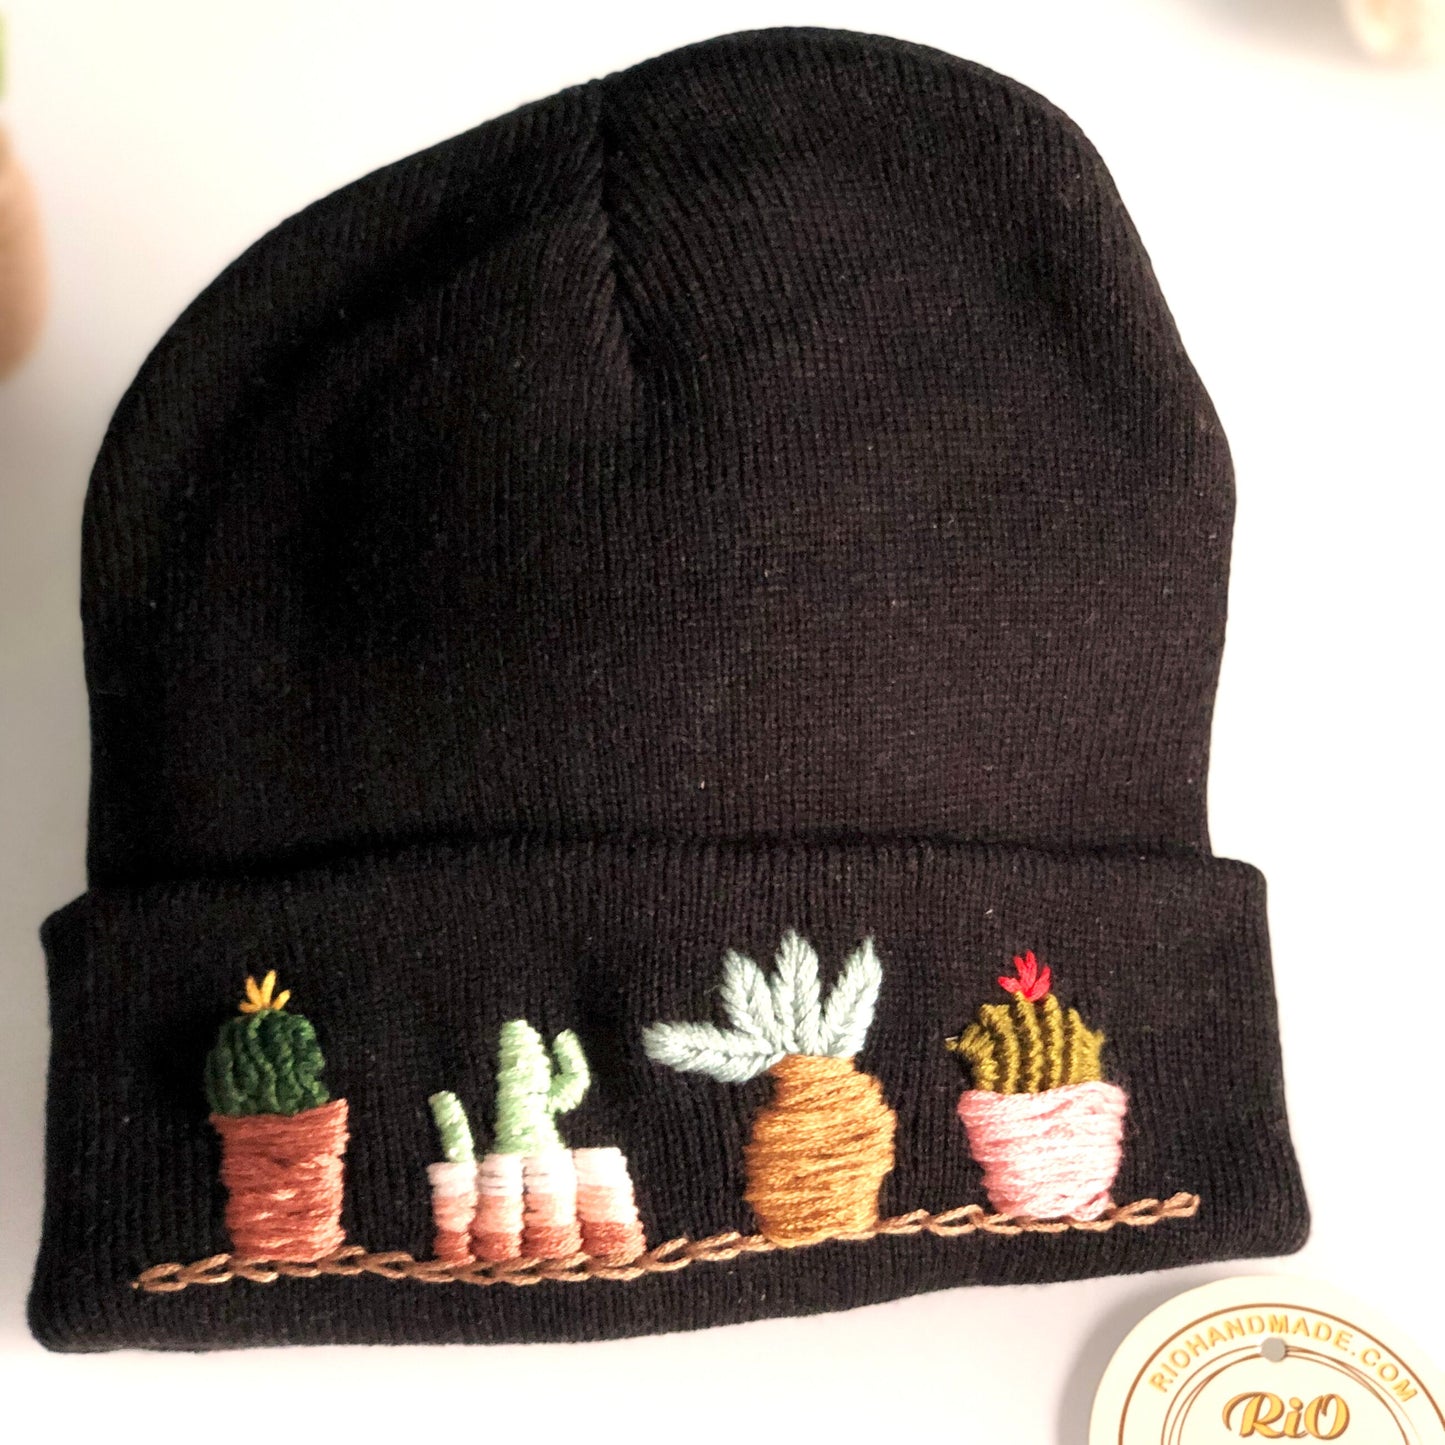 Hand embroidered Beanie, Winter Hat, Plant Hat, Handmade Hat, Cactus Embroidery